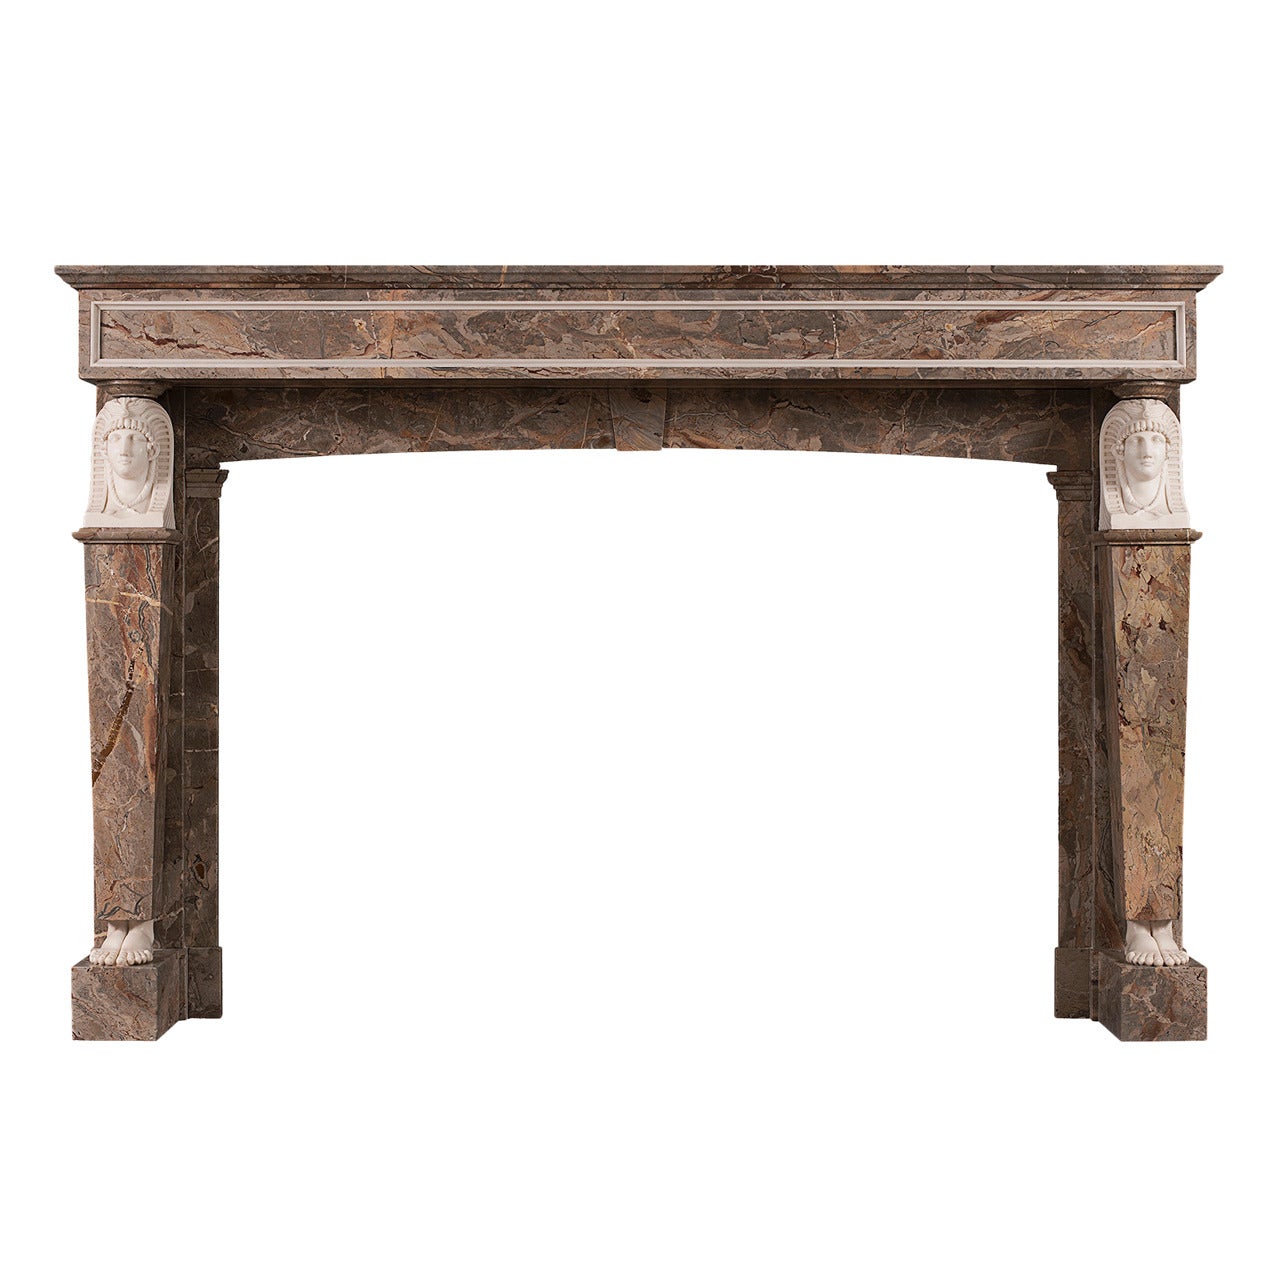 French Empire Sarancolin and Statuary Marble Fireplace Mantel